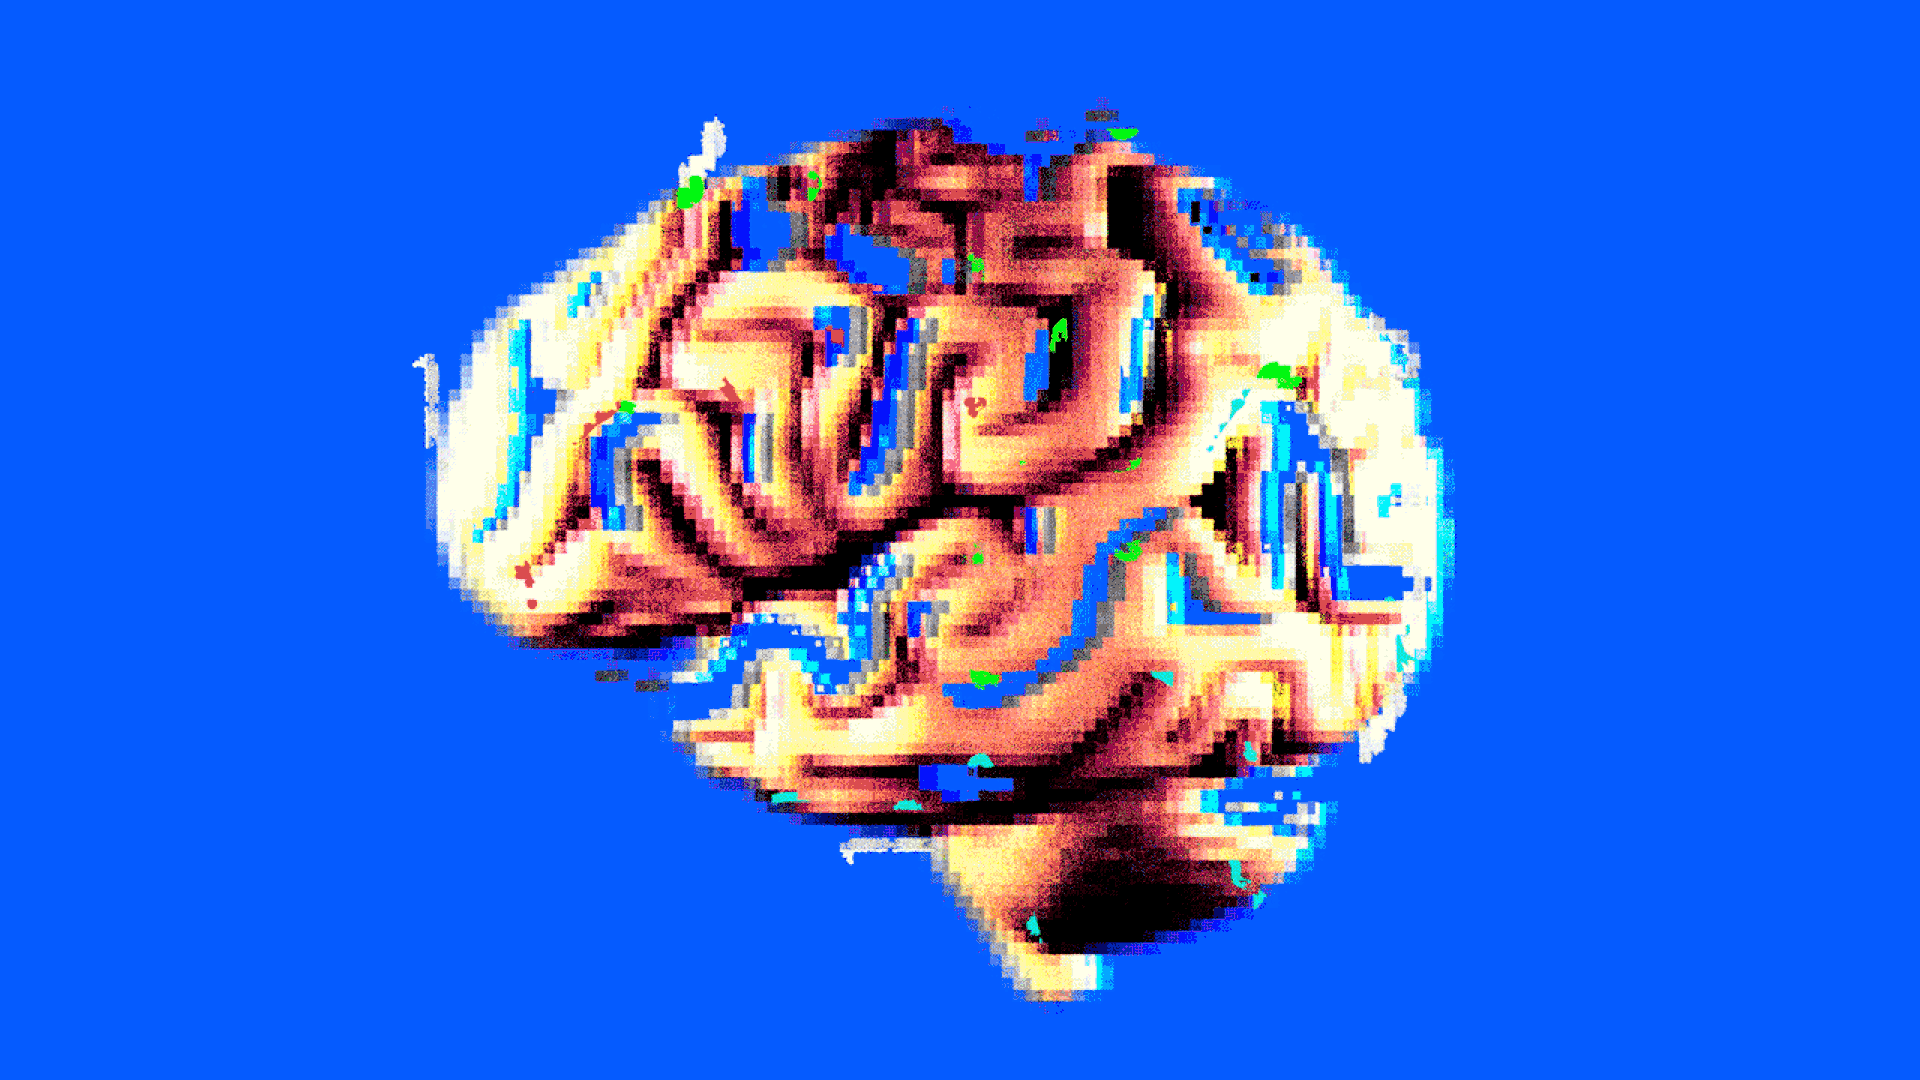 A pixelated illustration of a brain blurs vibrates in place